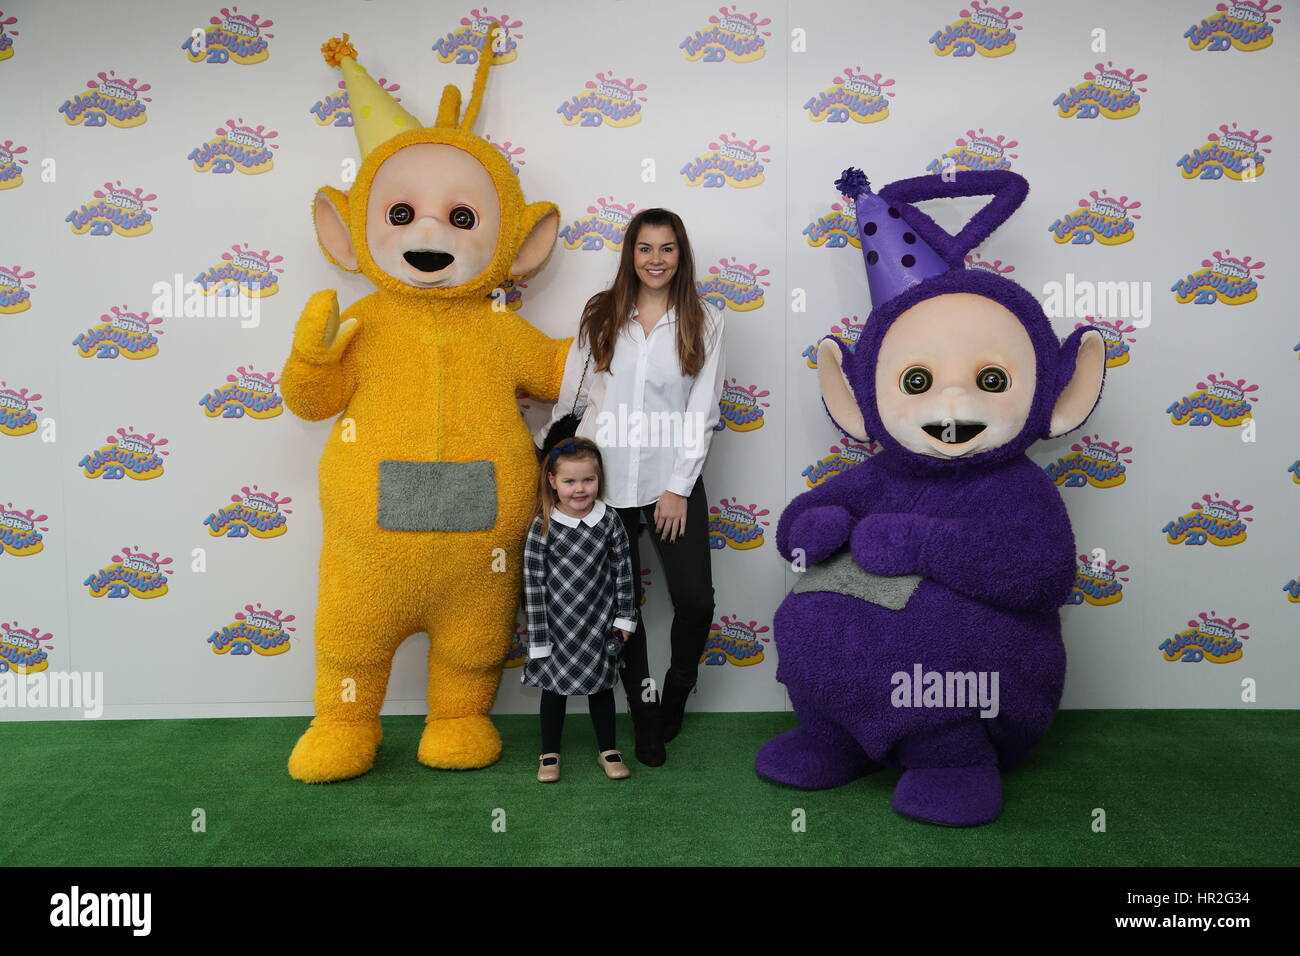 Imogen Thomas attending the Teletubbies 20th anniversary party at the BFI Southbank in London. Stock Photo